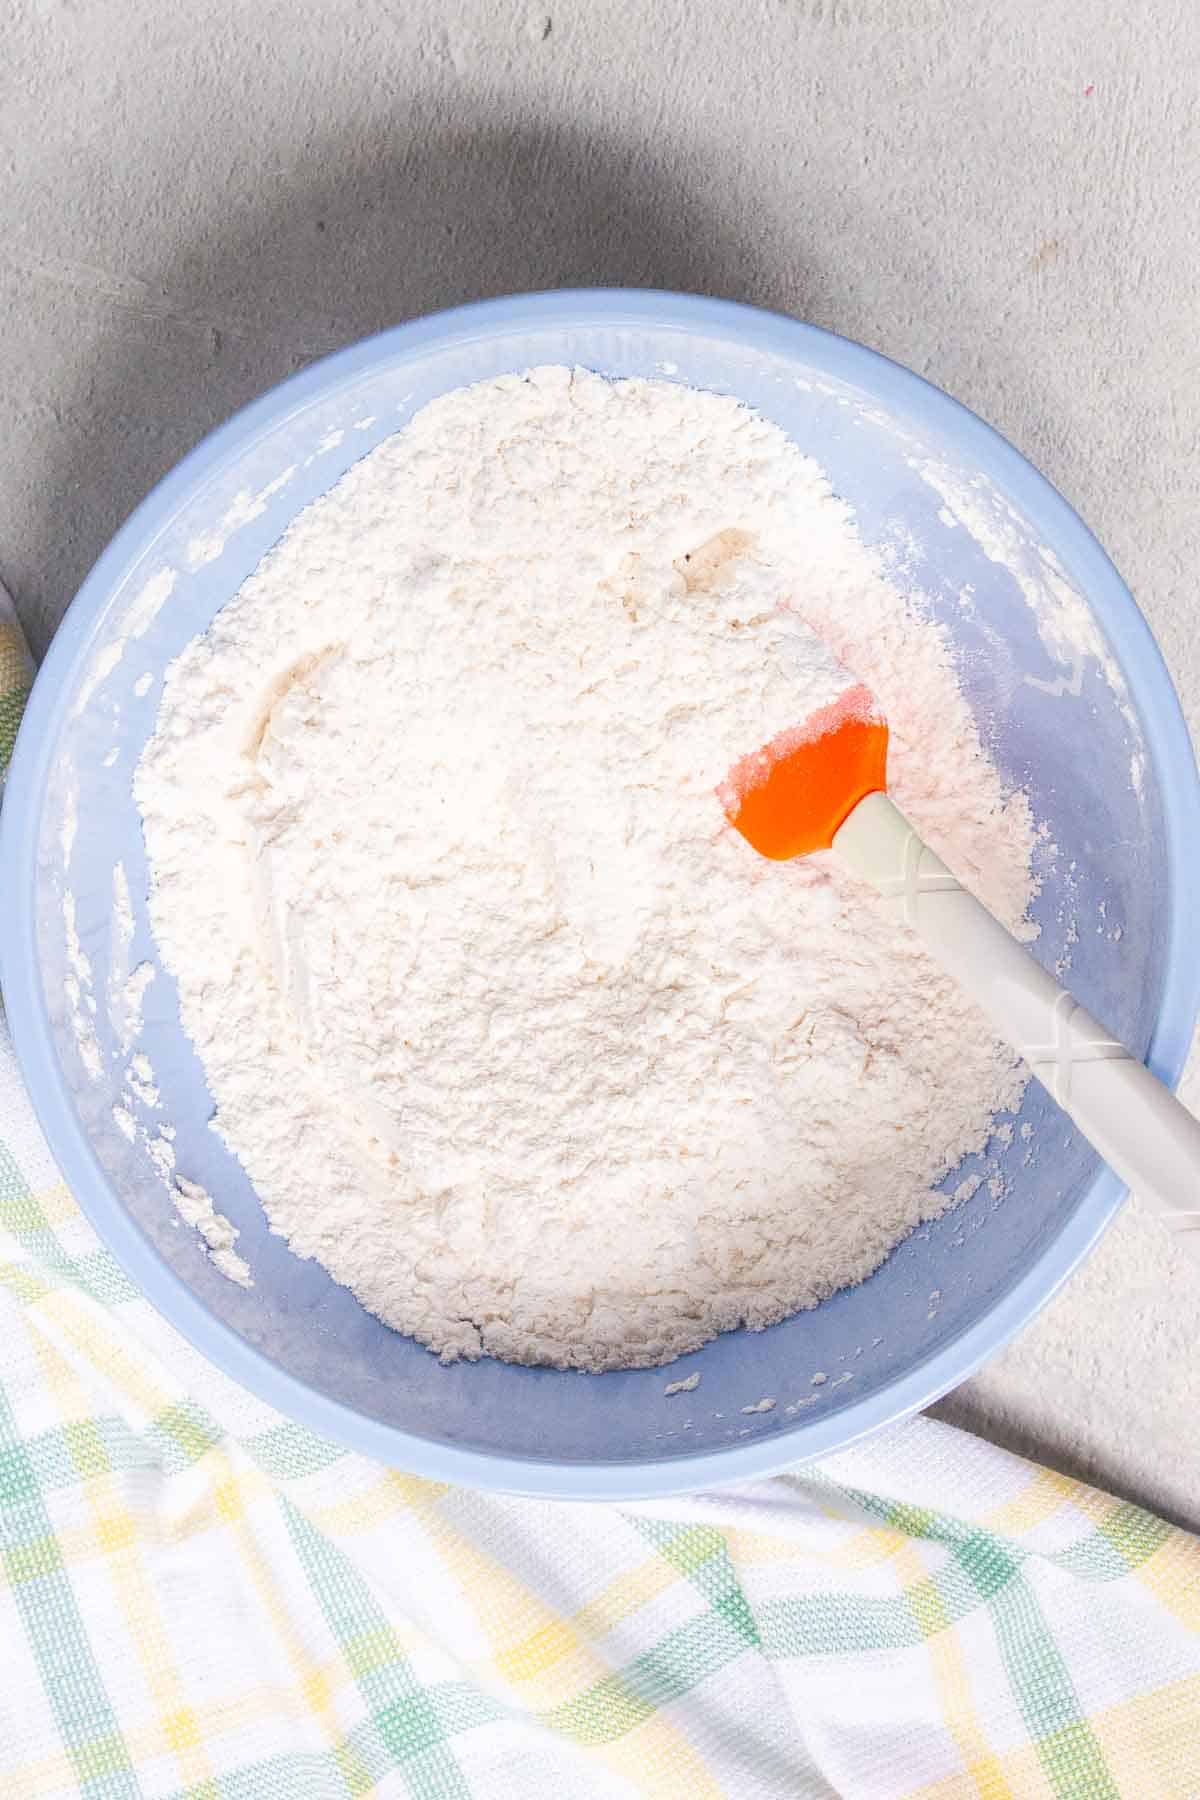 The dry ingredients are mixed together in a medium mixing bowl